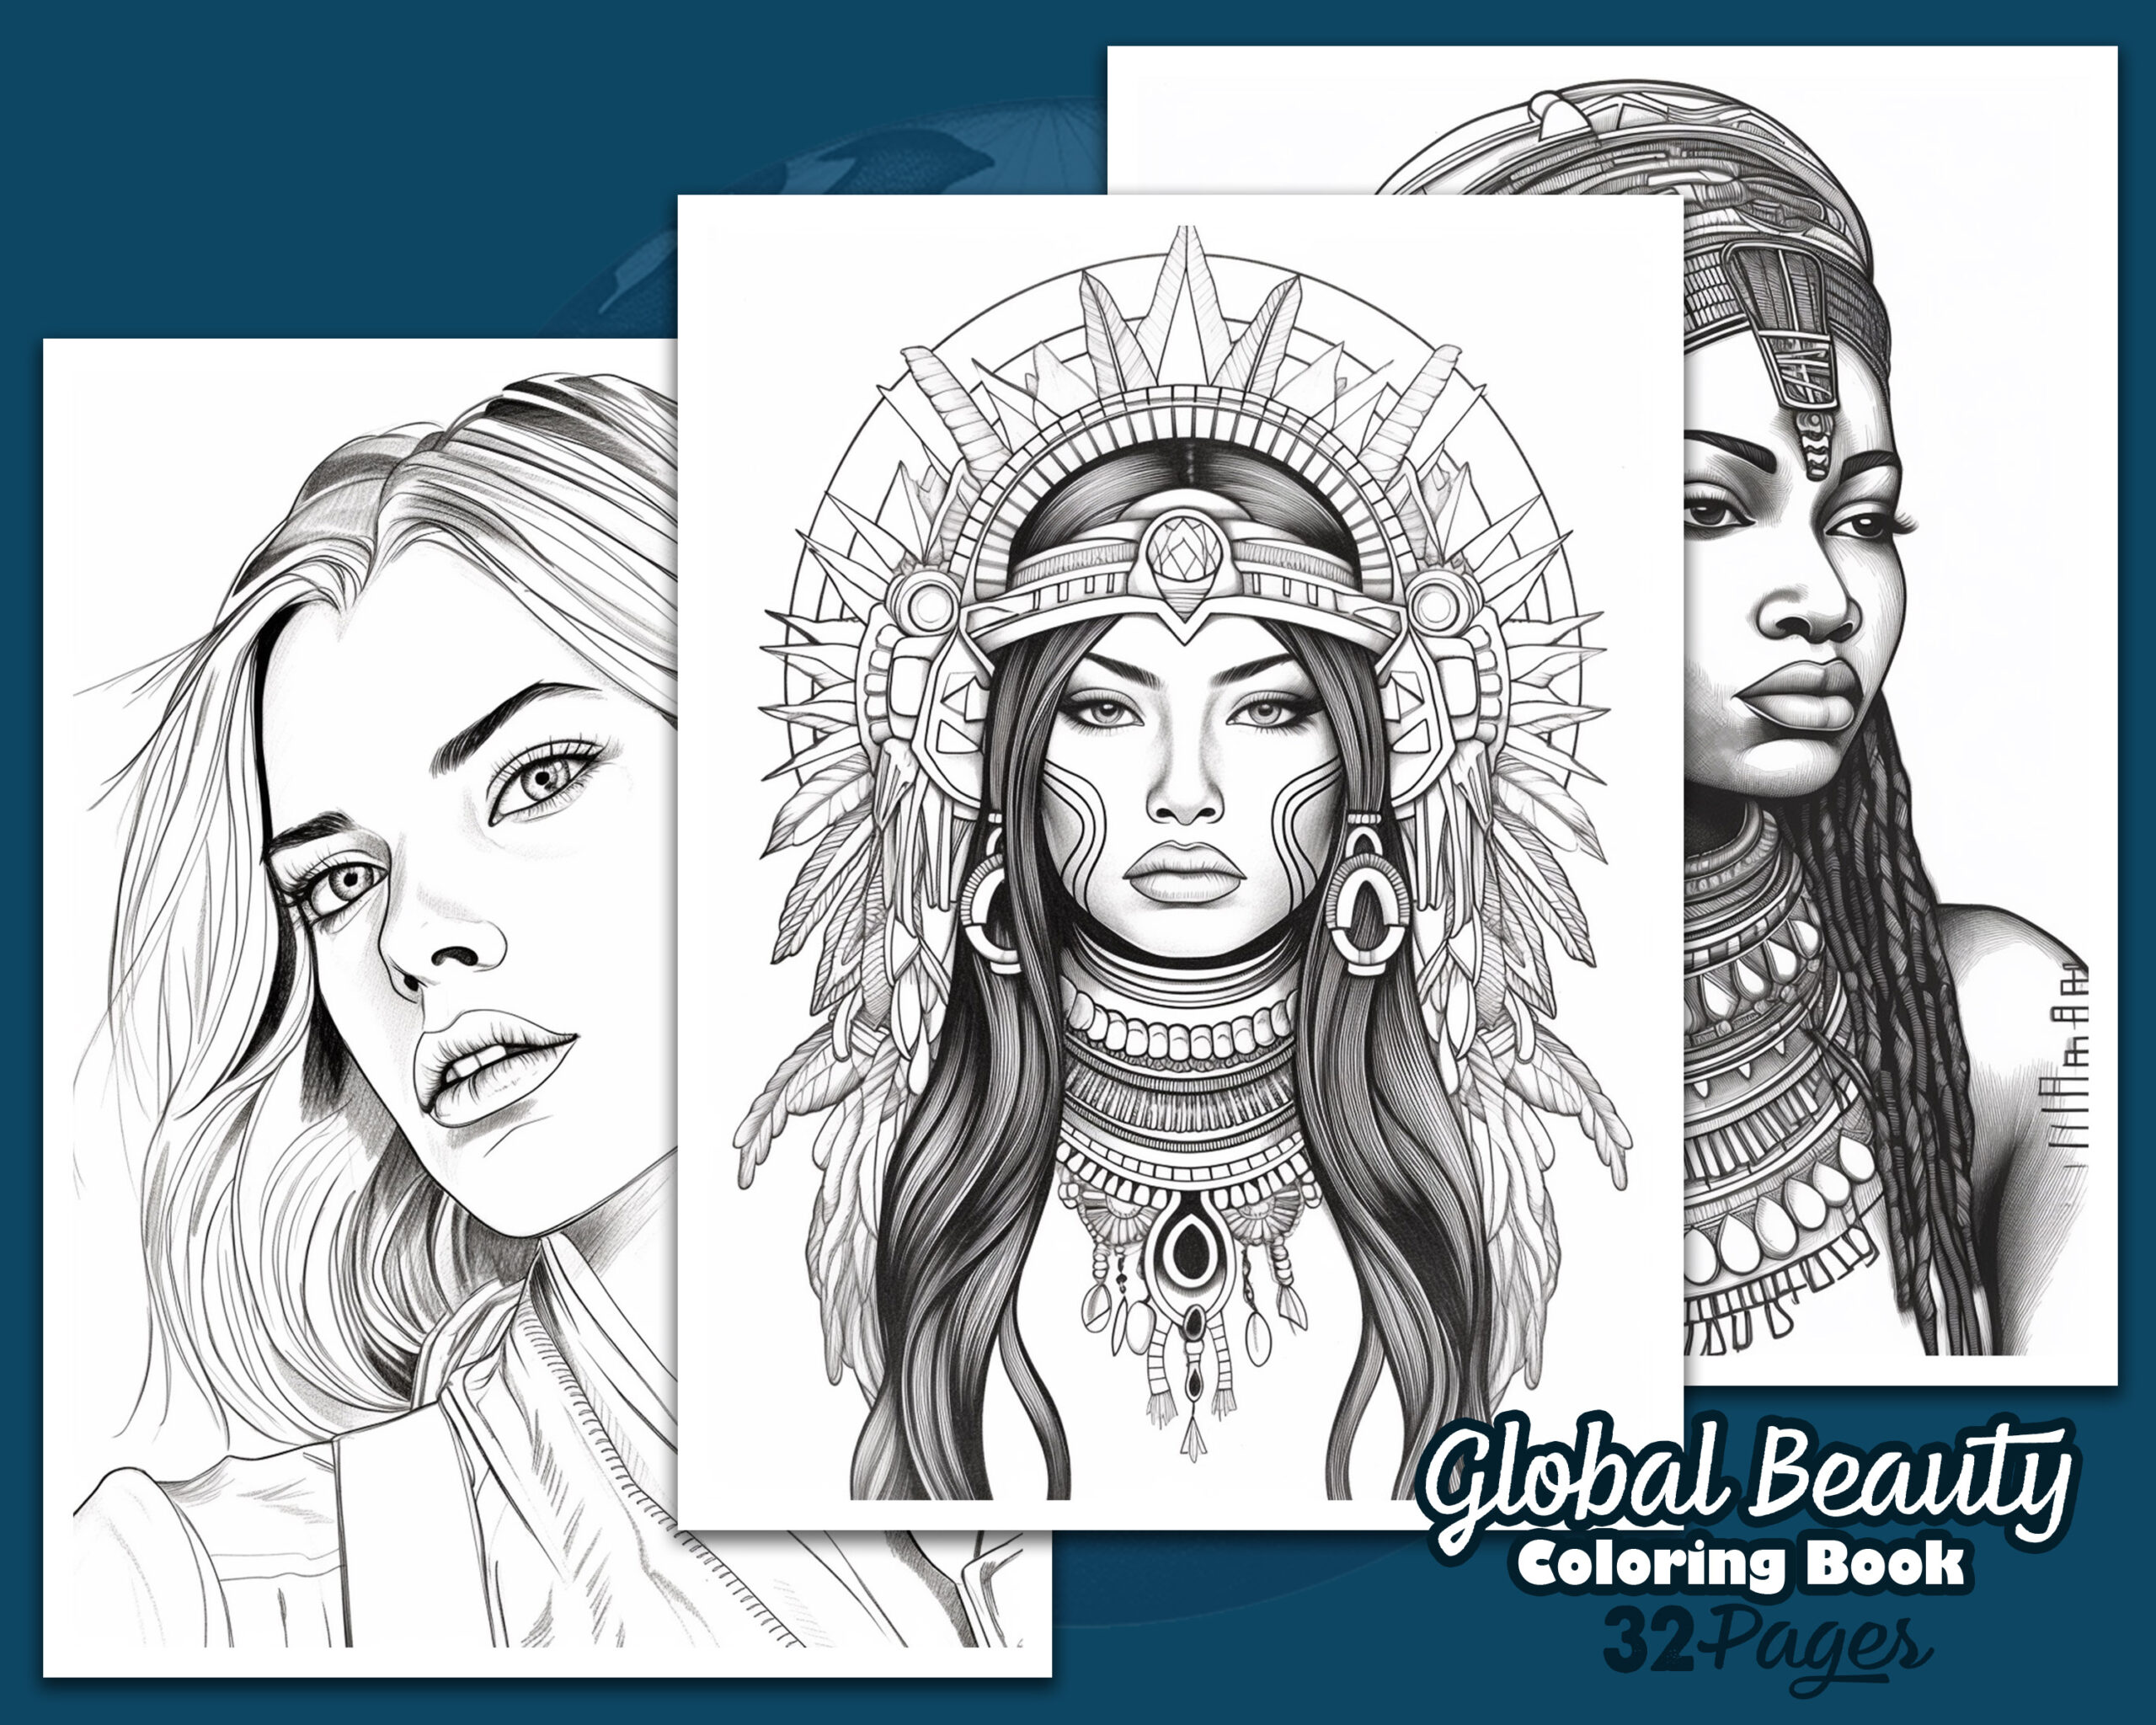 Global Beauty Coloring Book Page Samples